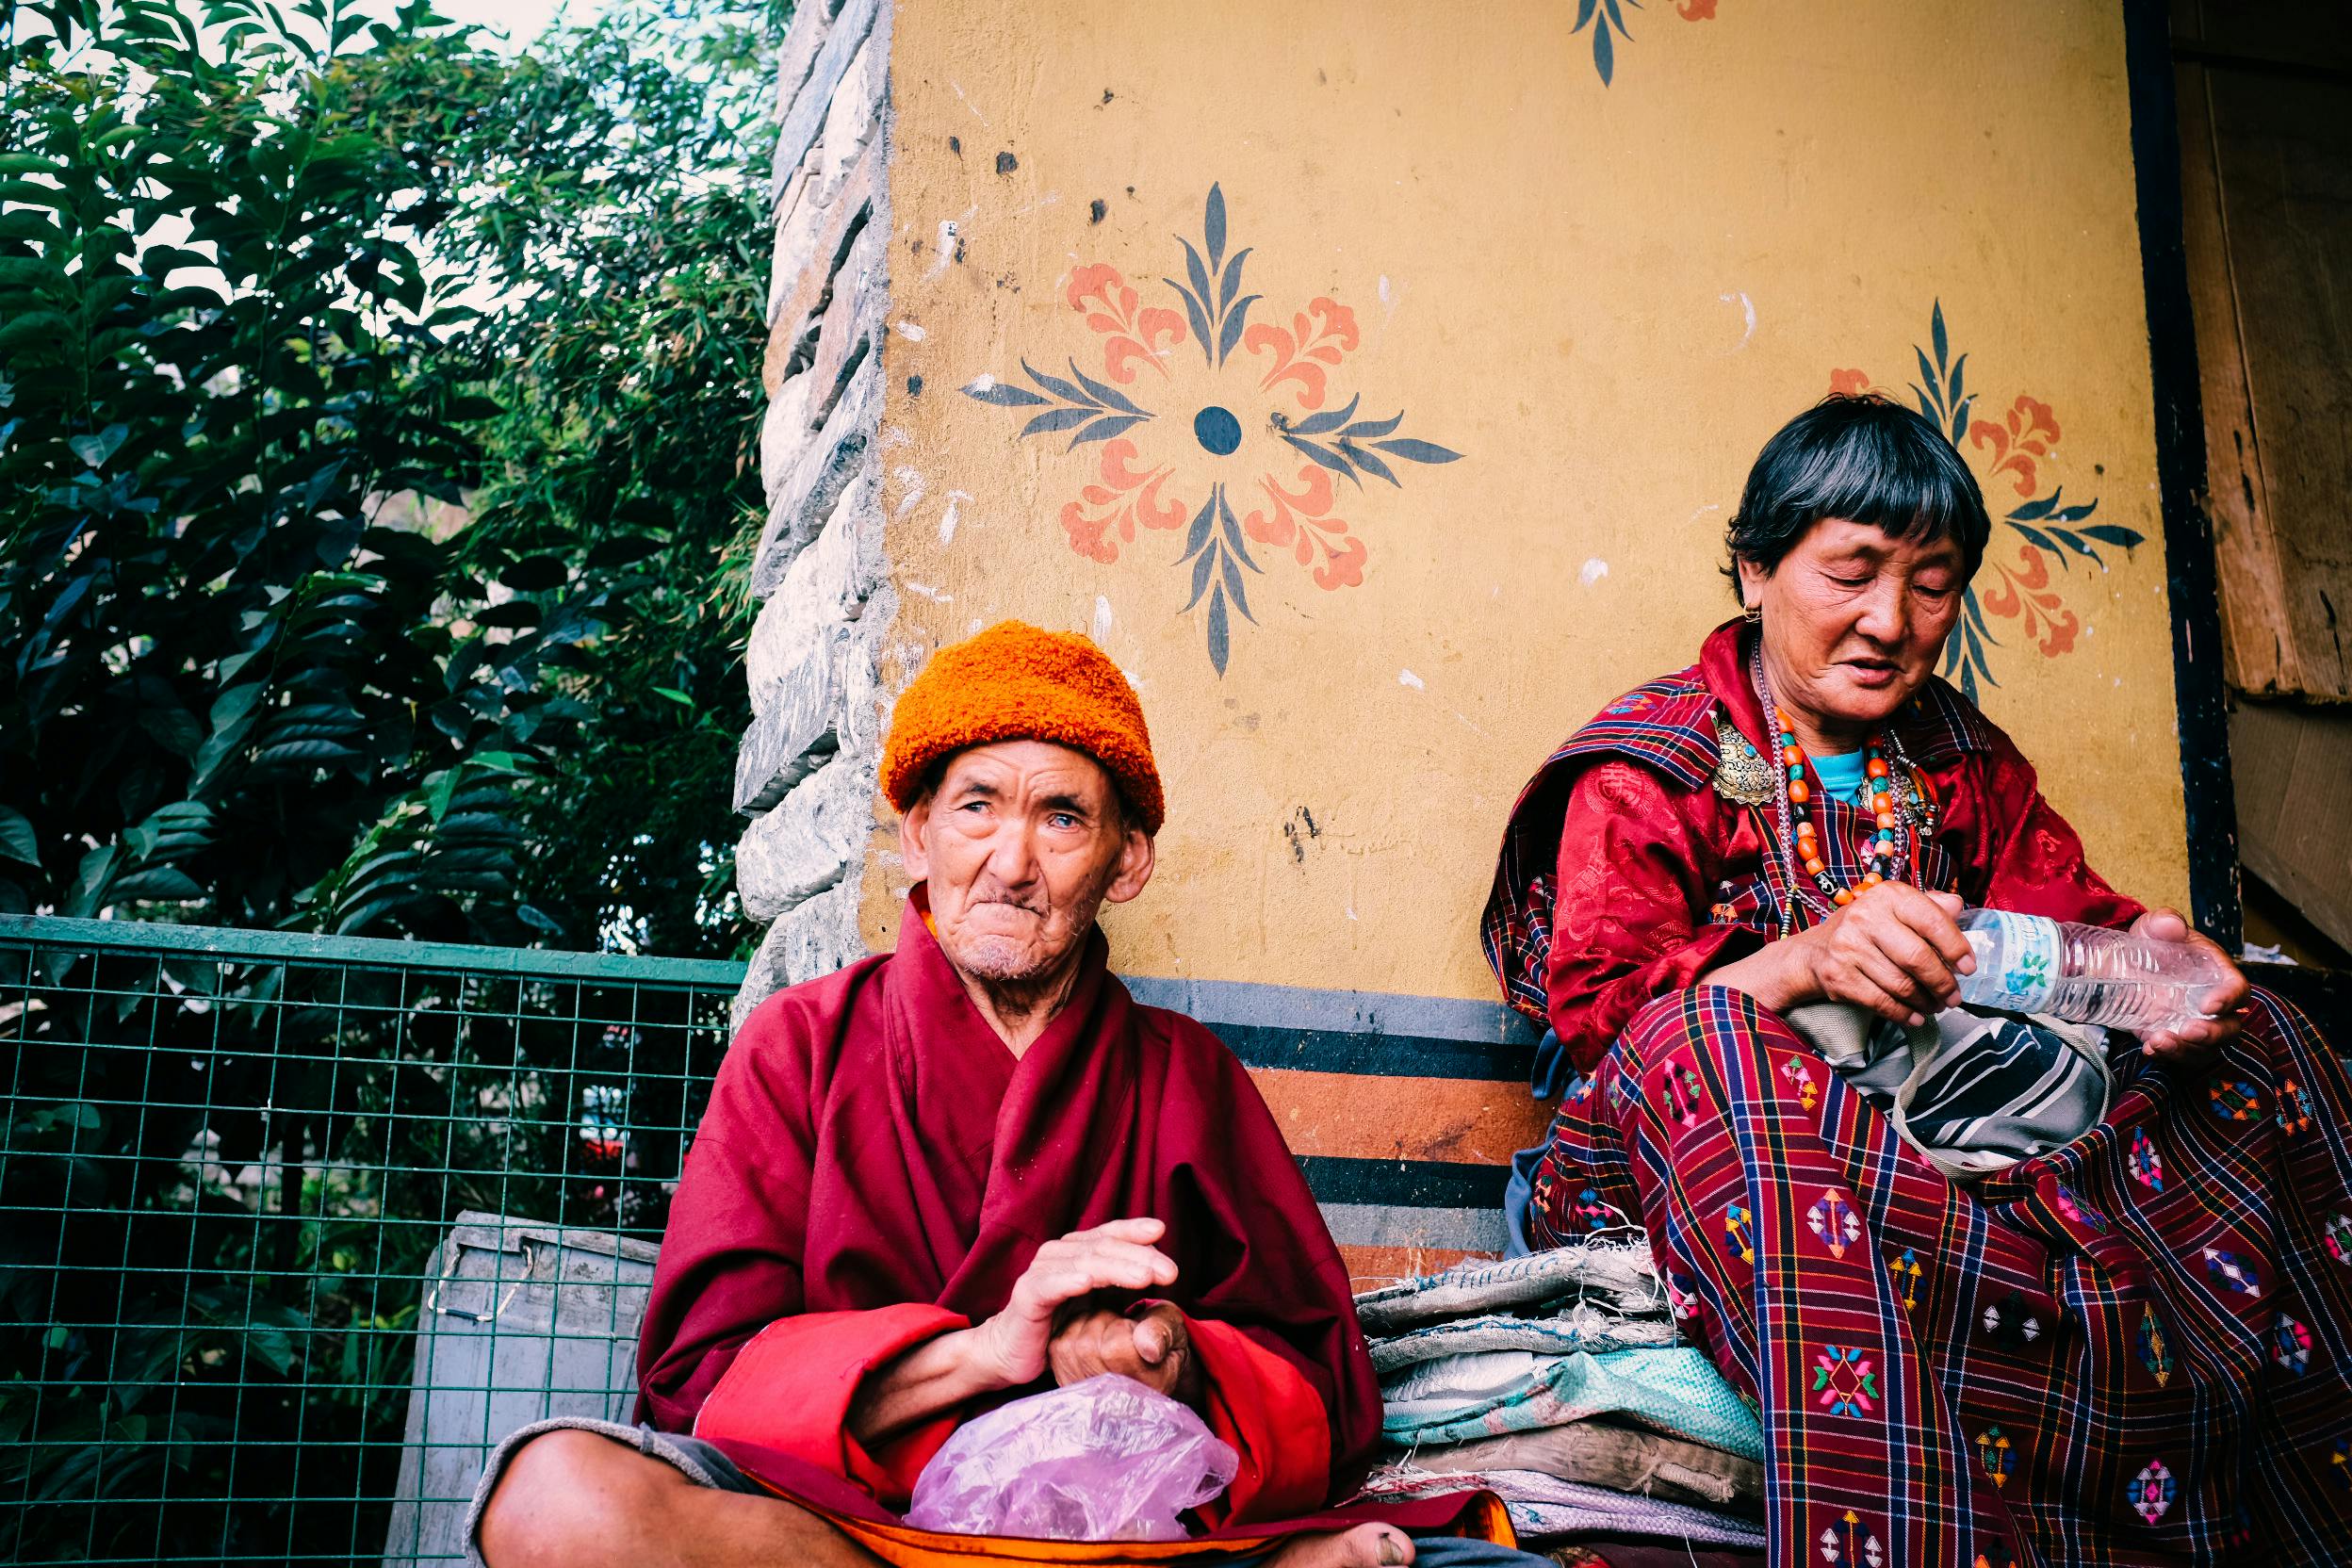 Two robed people sit together in Bhutan